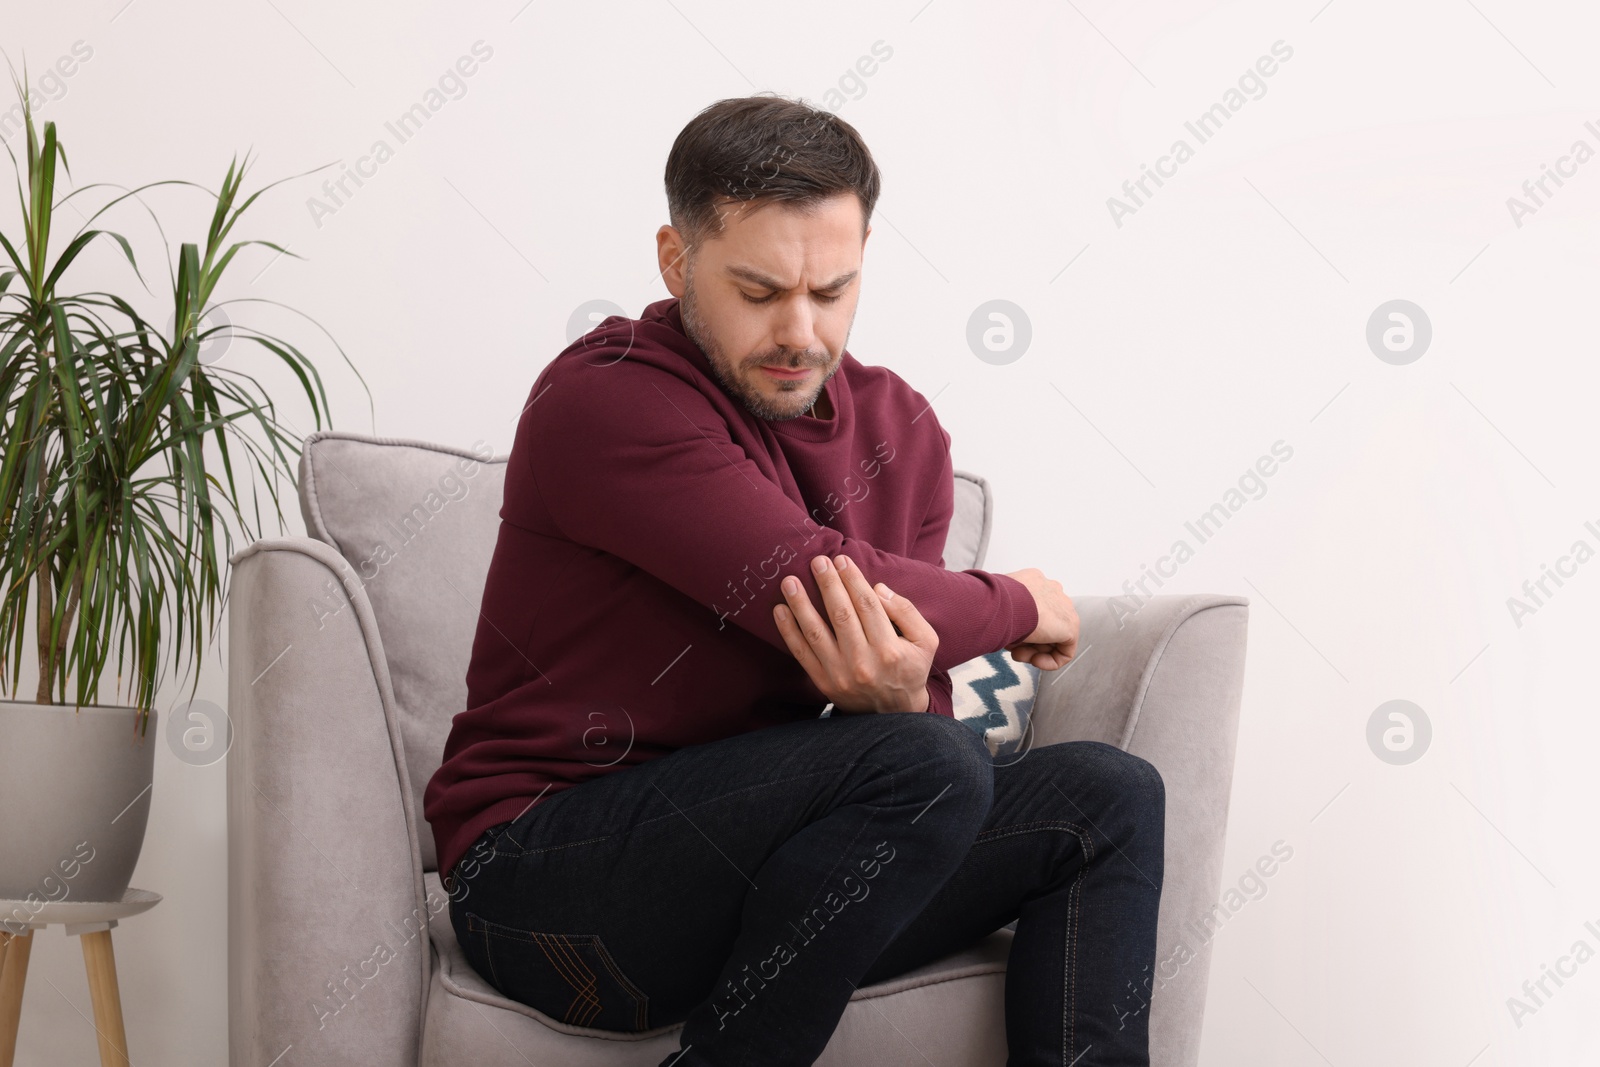 Photo of Man suffering from pain in his elbow on armchair indoors